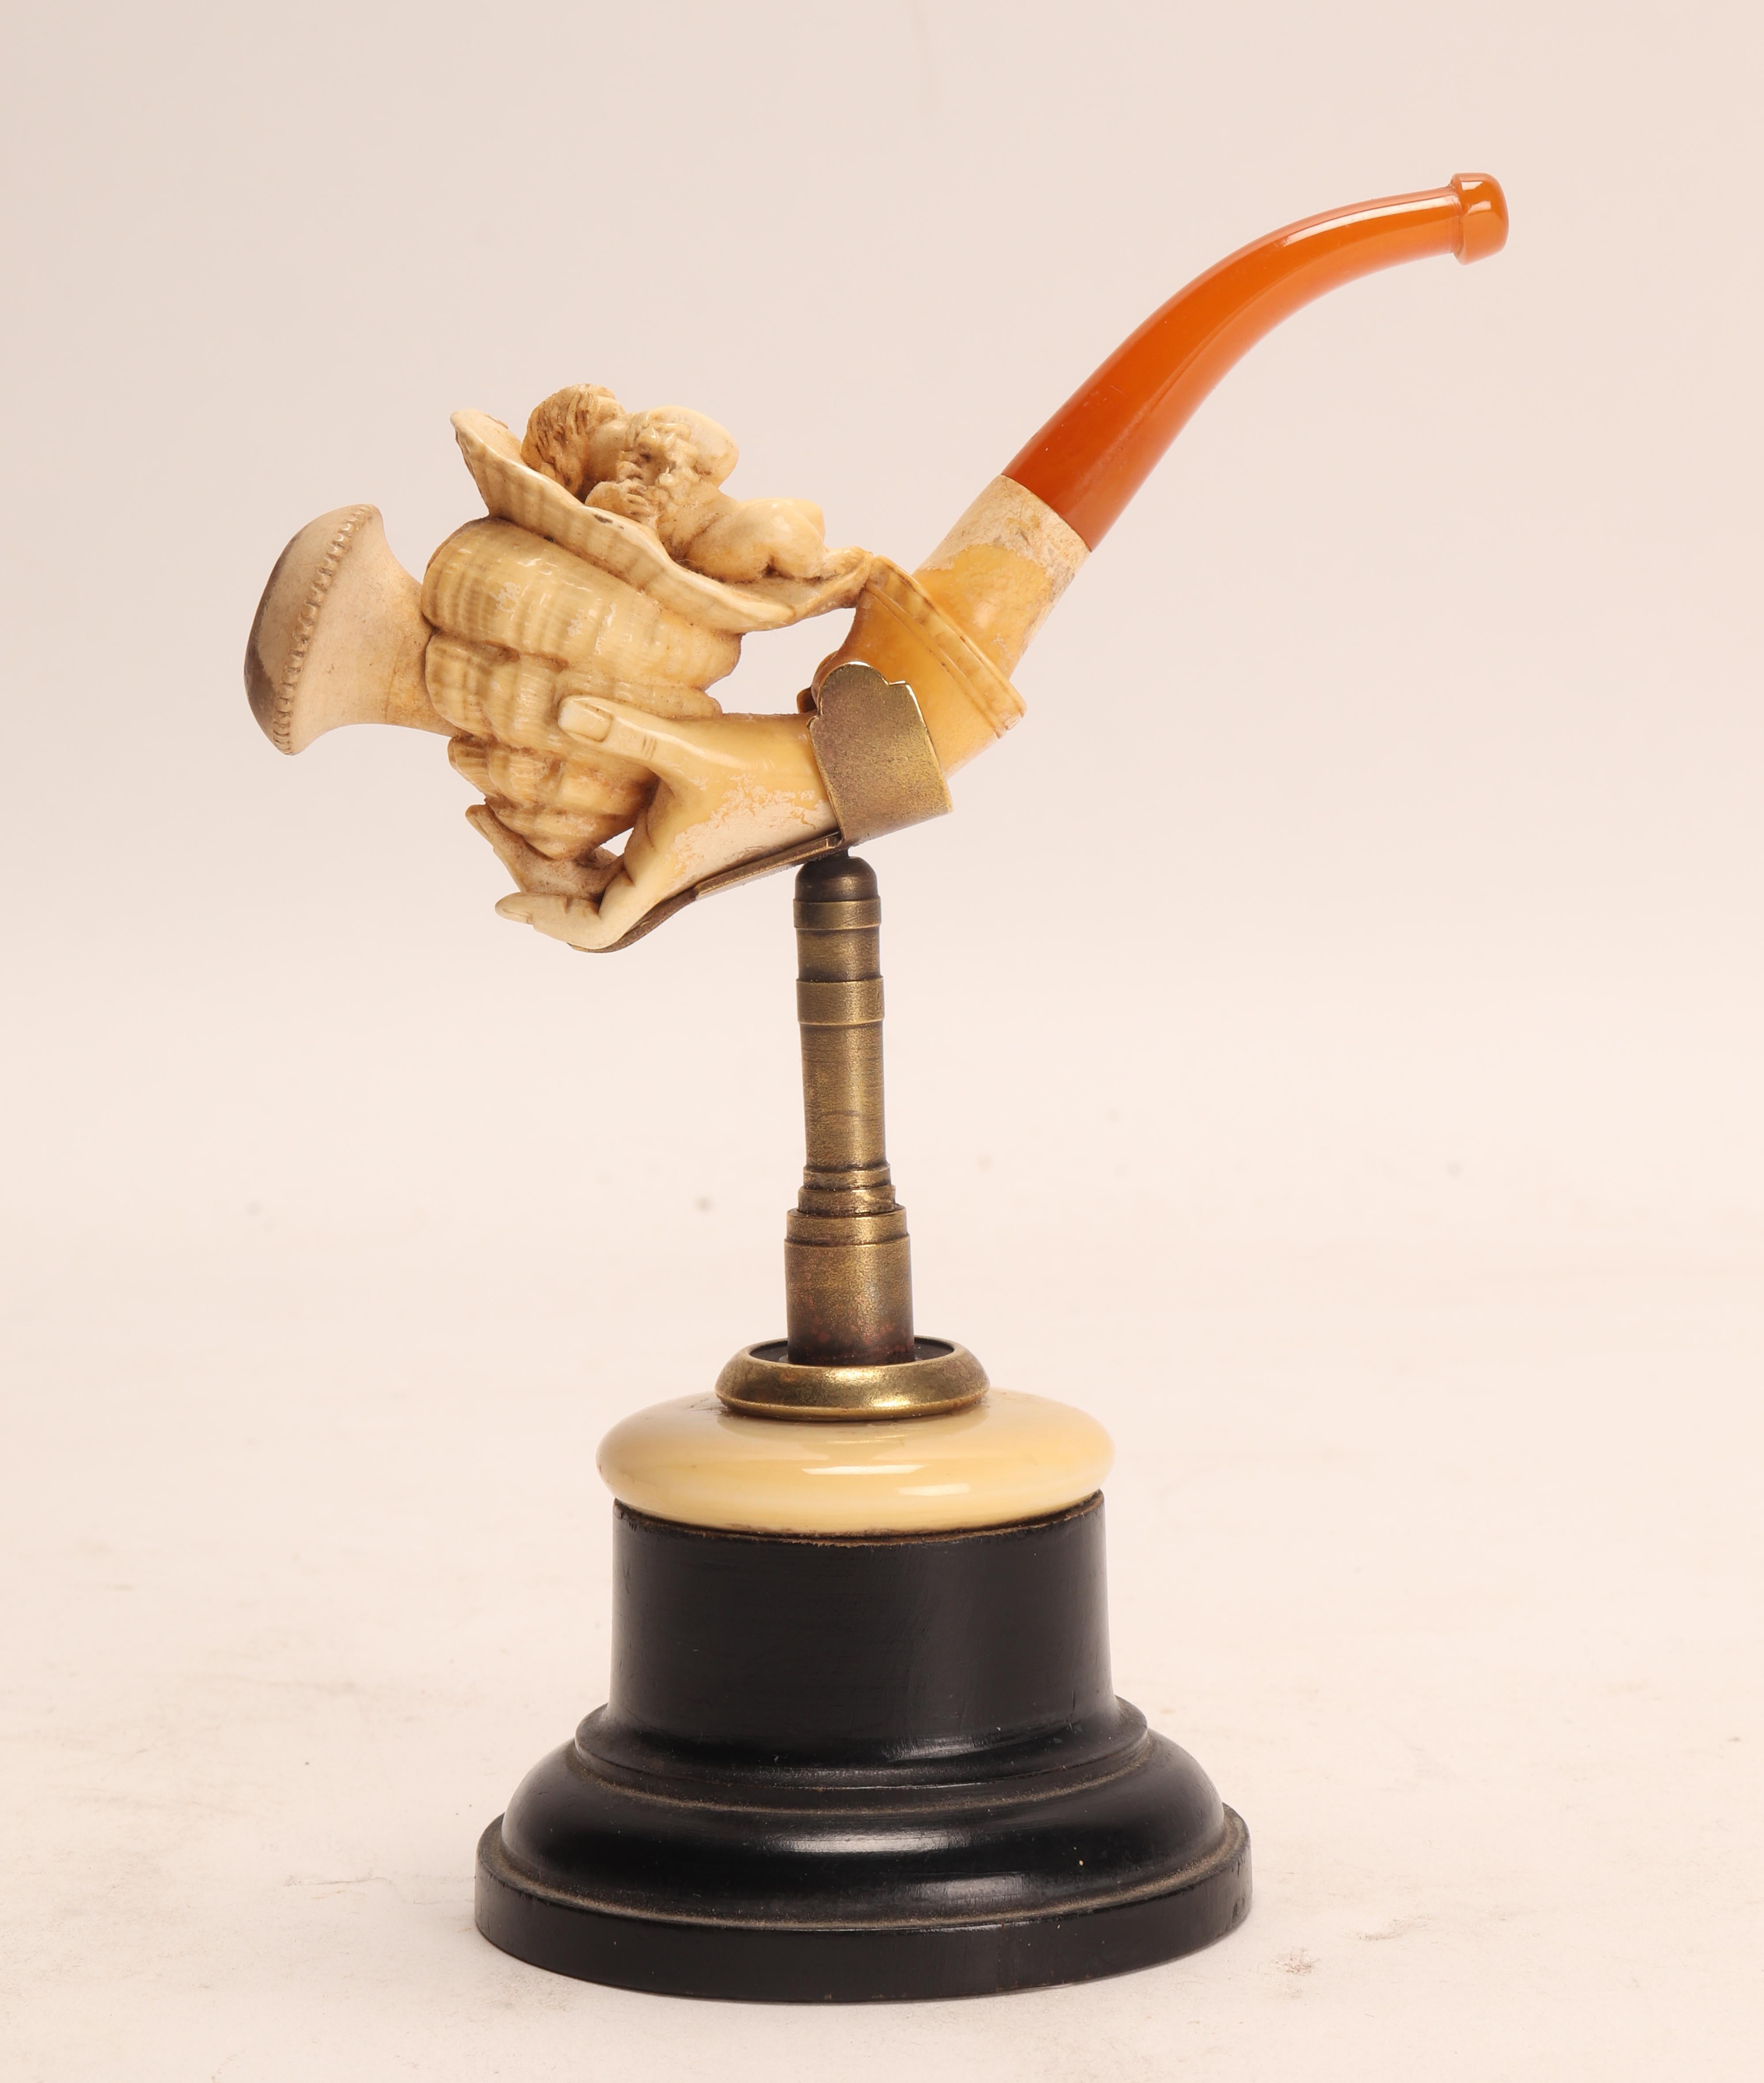 Tobacco taster pipe, made out of carved meershaum, with amber mouthpiece. One hand holds a cornucopia with Cupid. Vienna, Austria circa 1890.  (The stand is for photographic use only, not for sale).